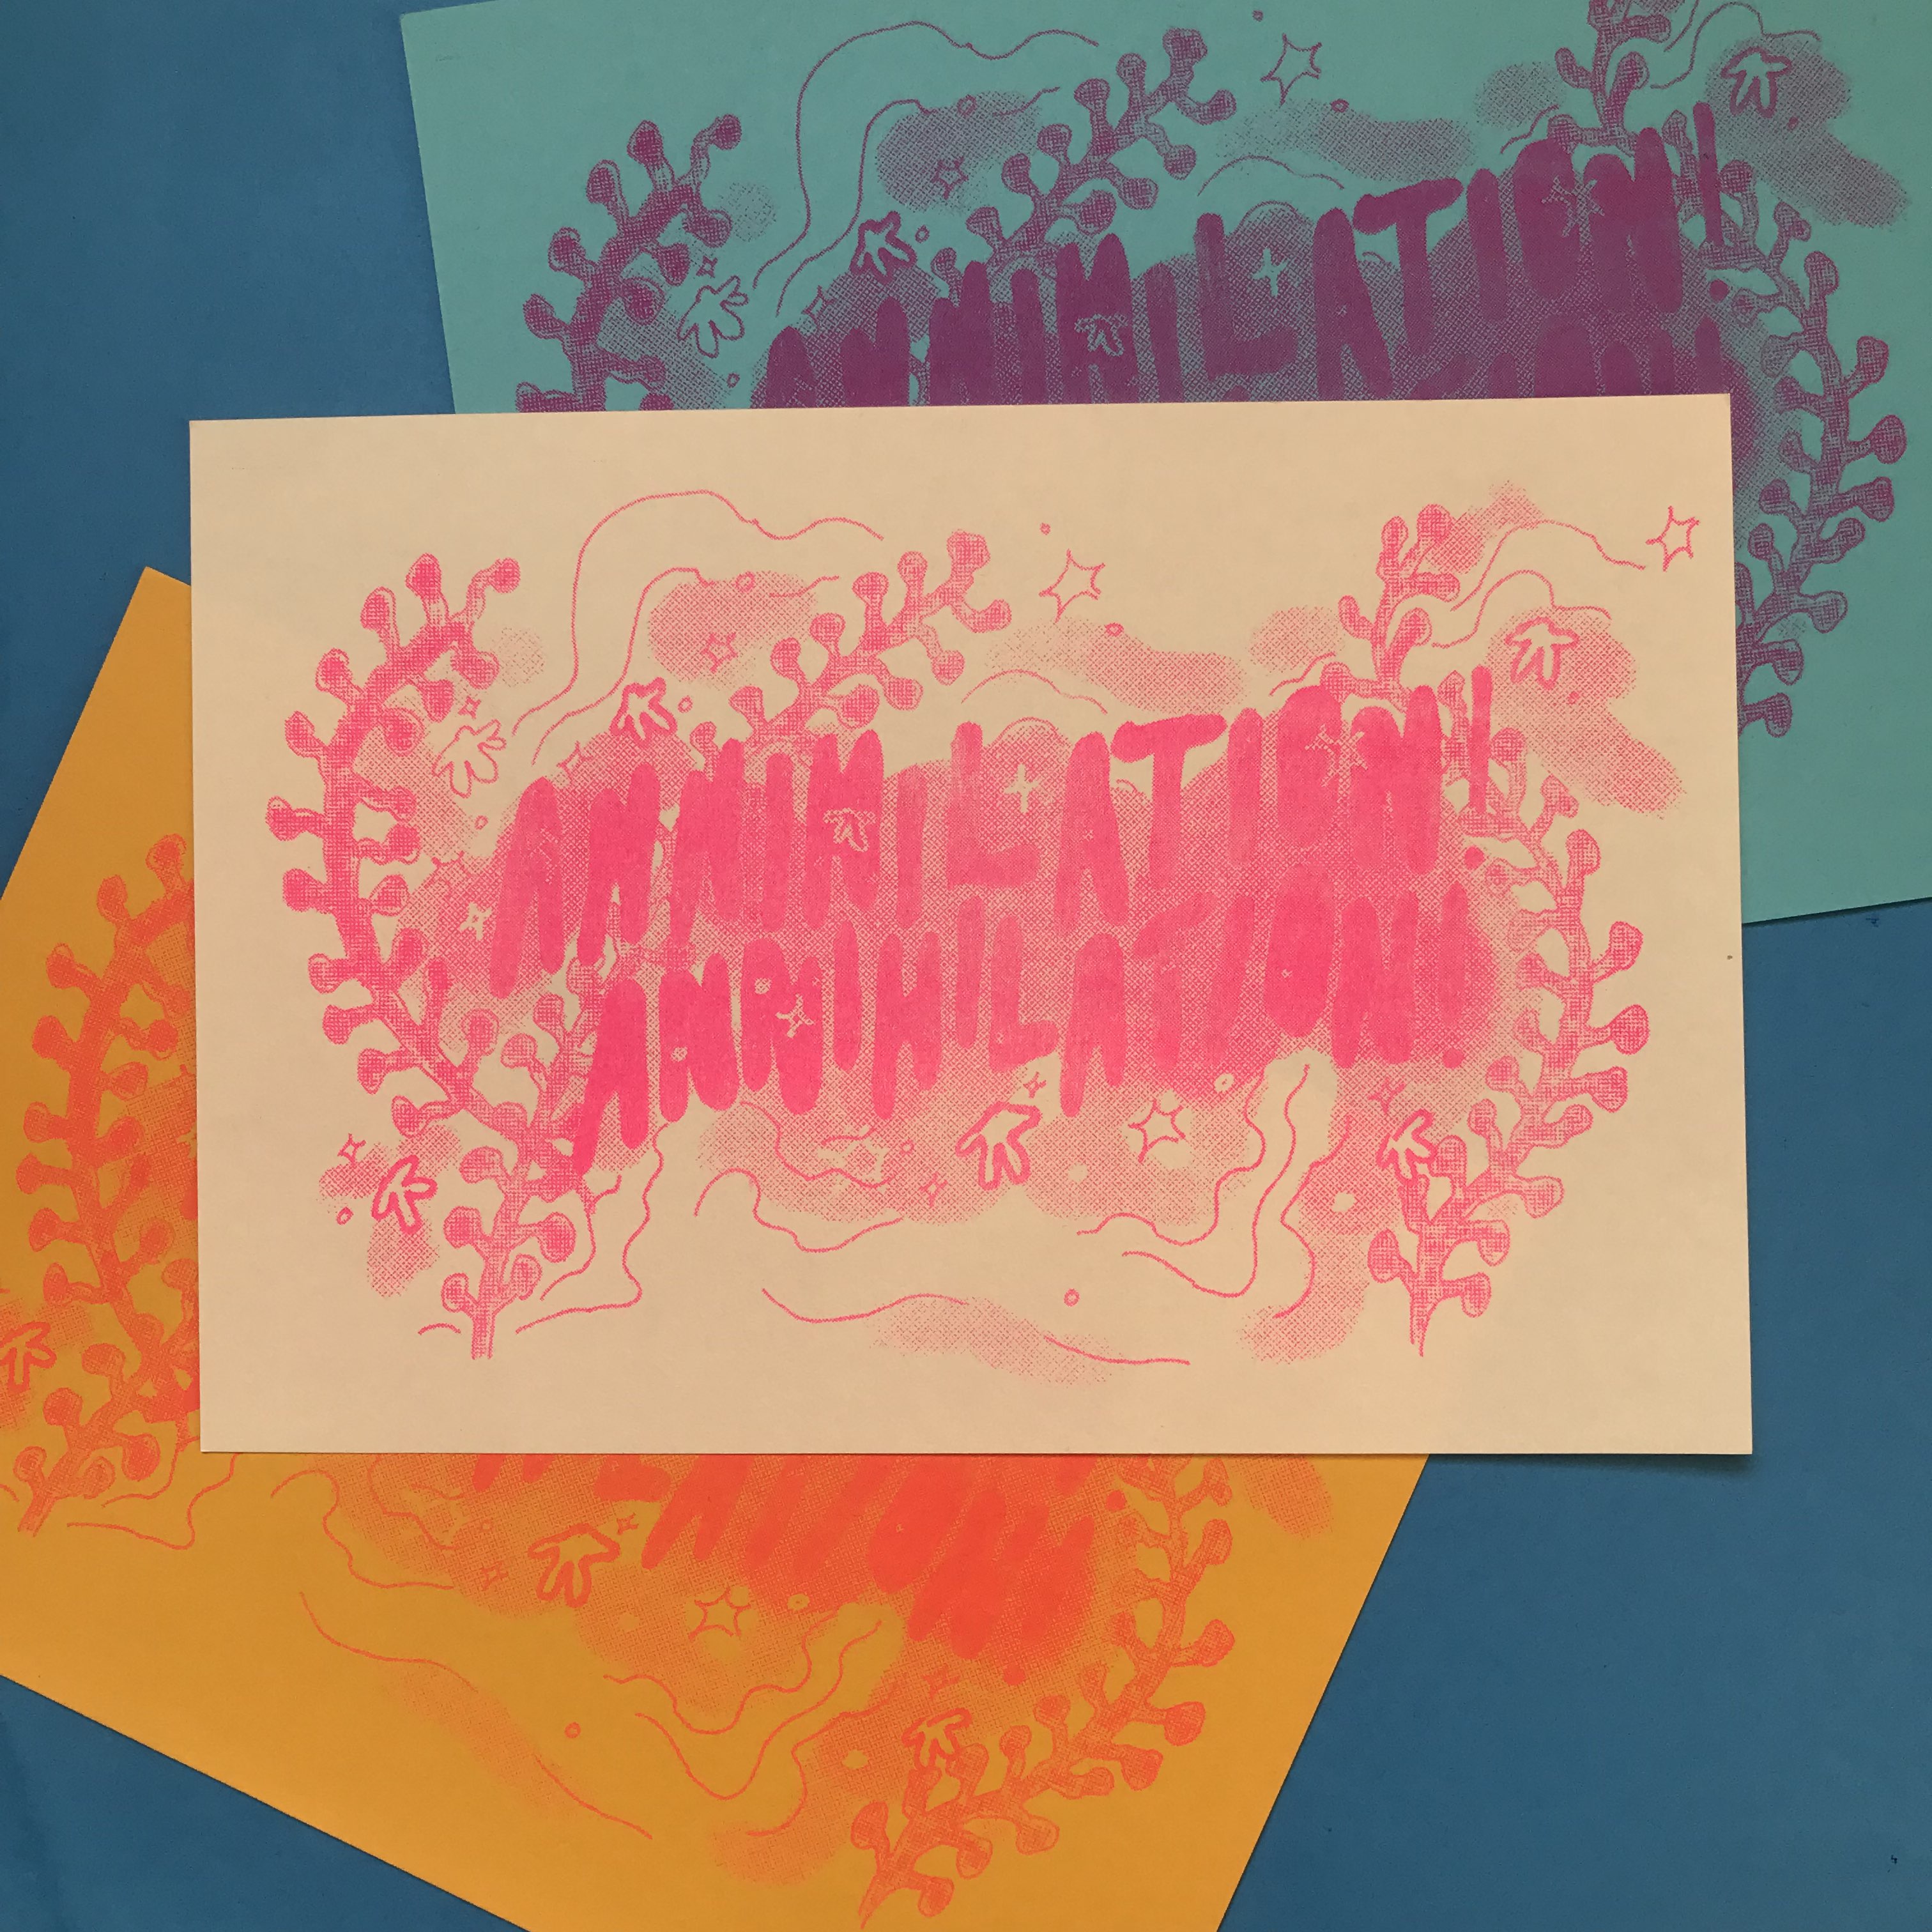 A product photo of a scattered pile of risoprints, all in pink ink, on blue and yellow paper with white at the top. The risoprint design has the text 'Annihilation! Annihilation!' in front of a halftone background with plants and spores.